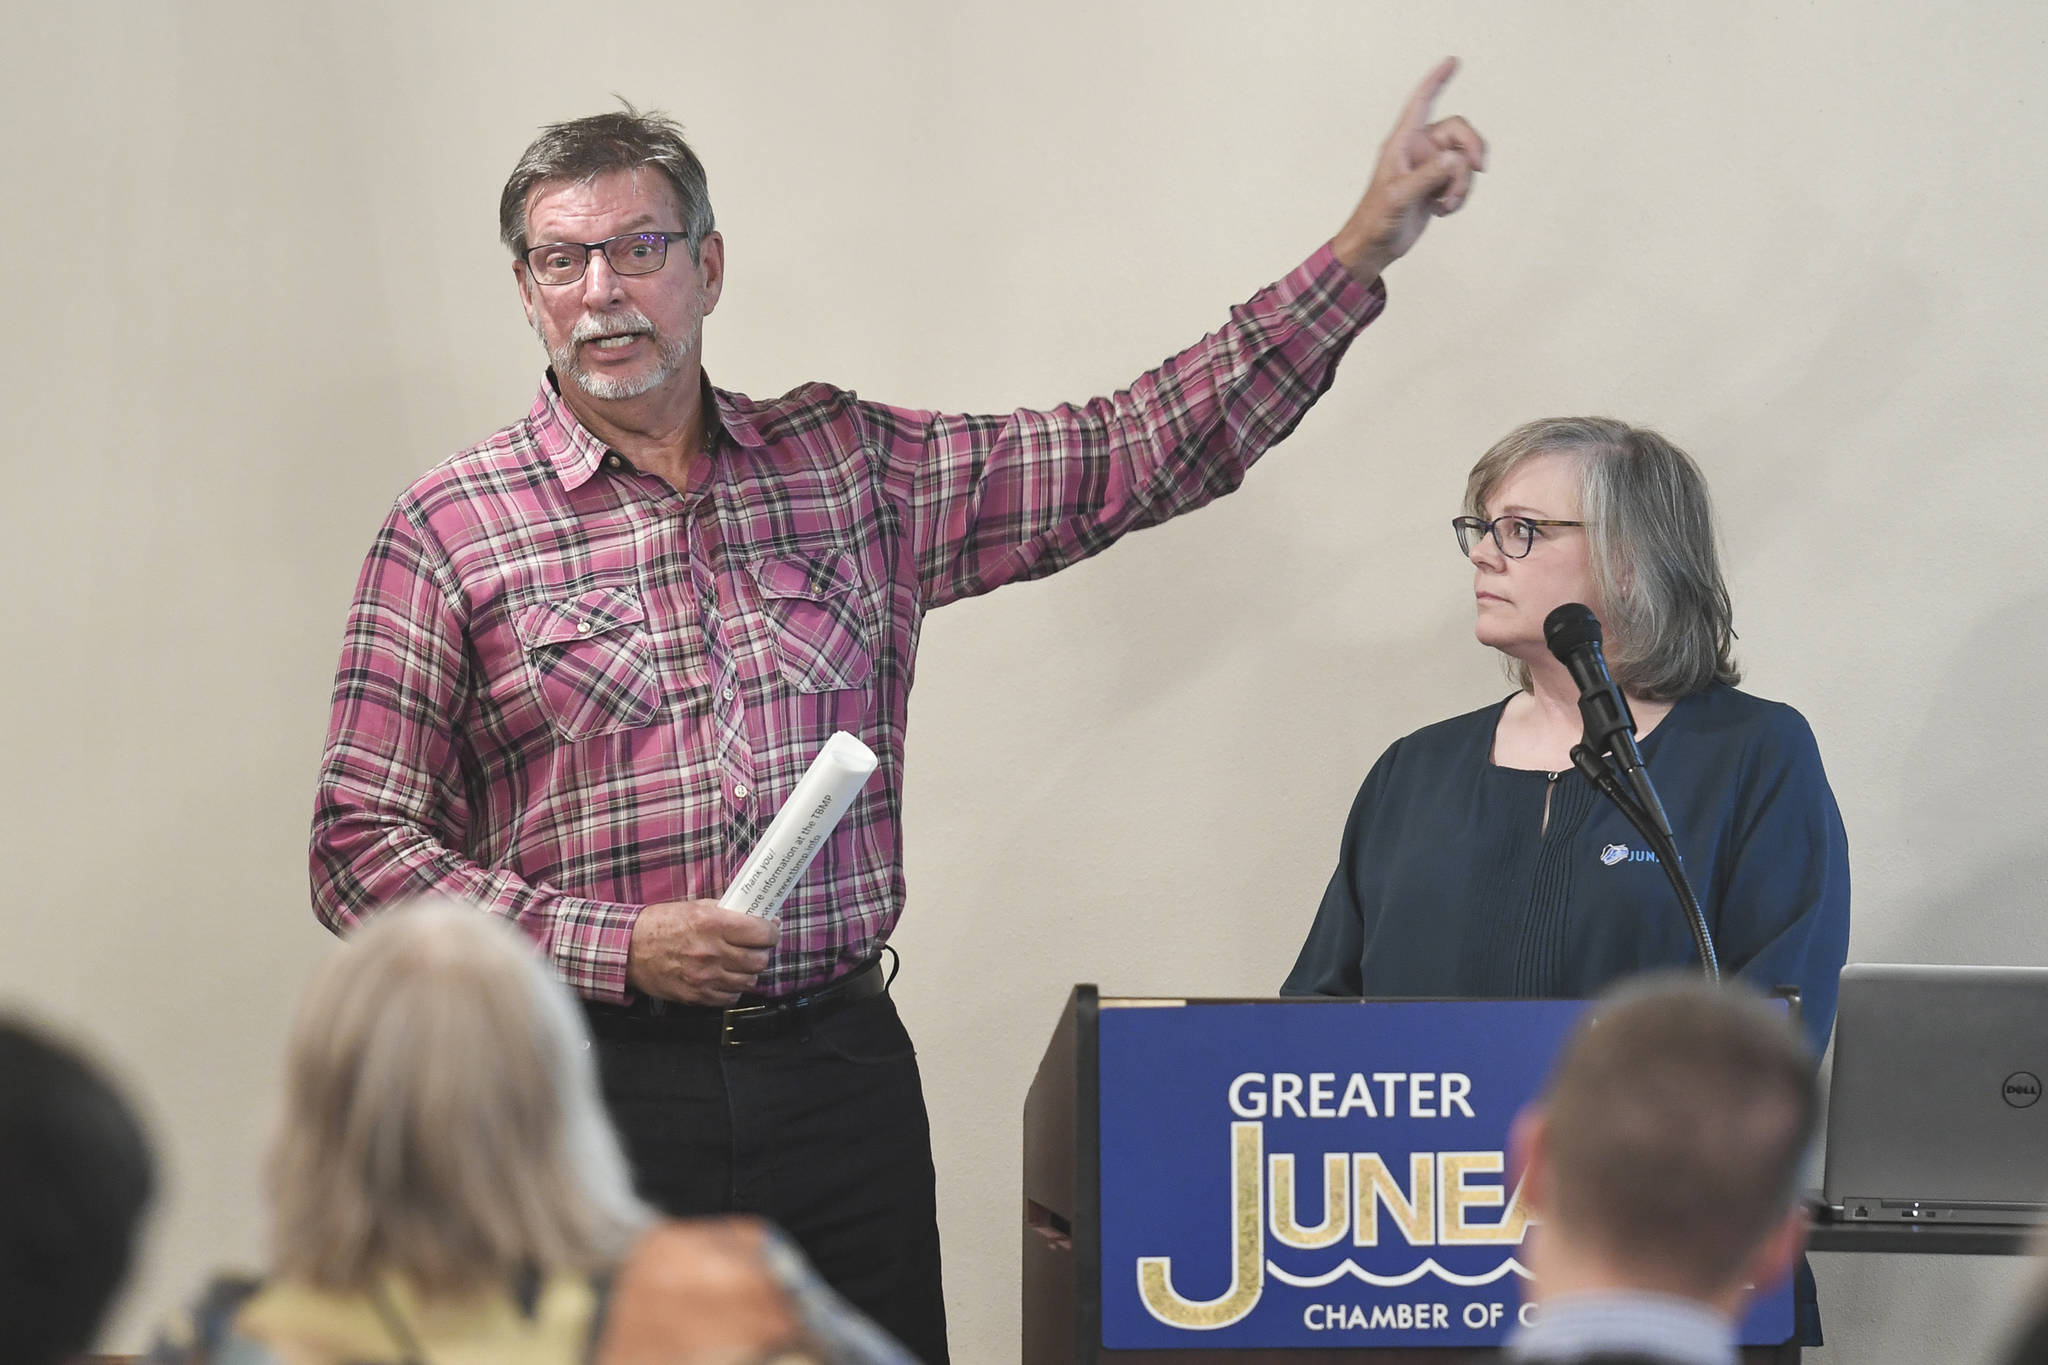 Kirby Day, operations manager for Princess Cruises, left, and Liz Perry, CEO and President of Travel Juneau, speak about visitor industry issues during the Juneau Chamber of Commerce’s weekly luncheon at the Moose Lodge on Thursday, Aug. 22, 2019. (Michael Penn | Juneau Empire)